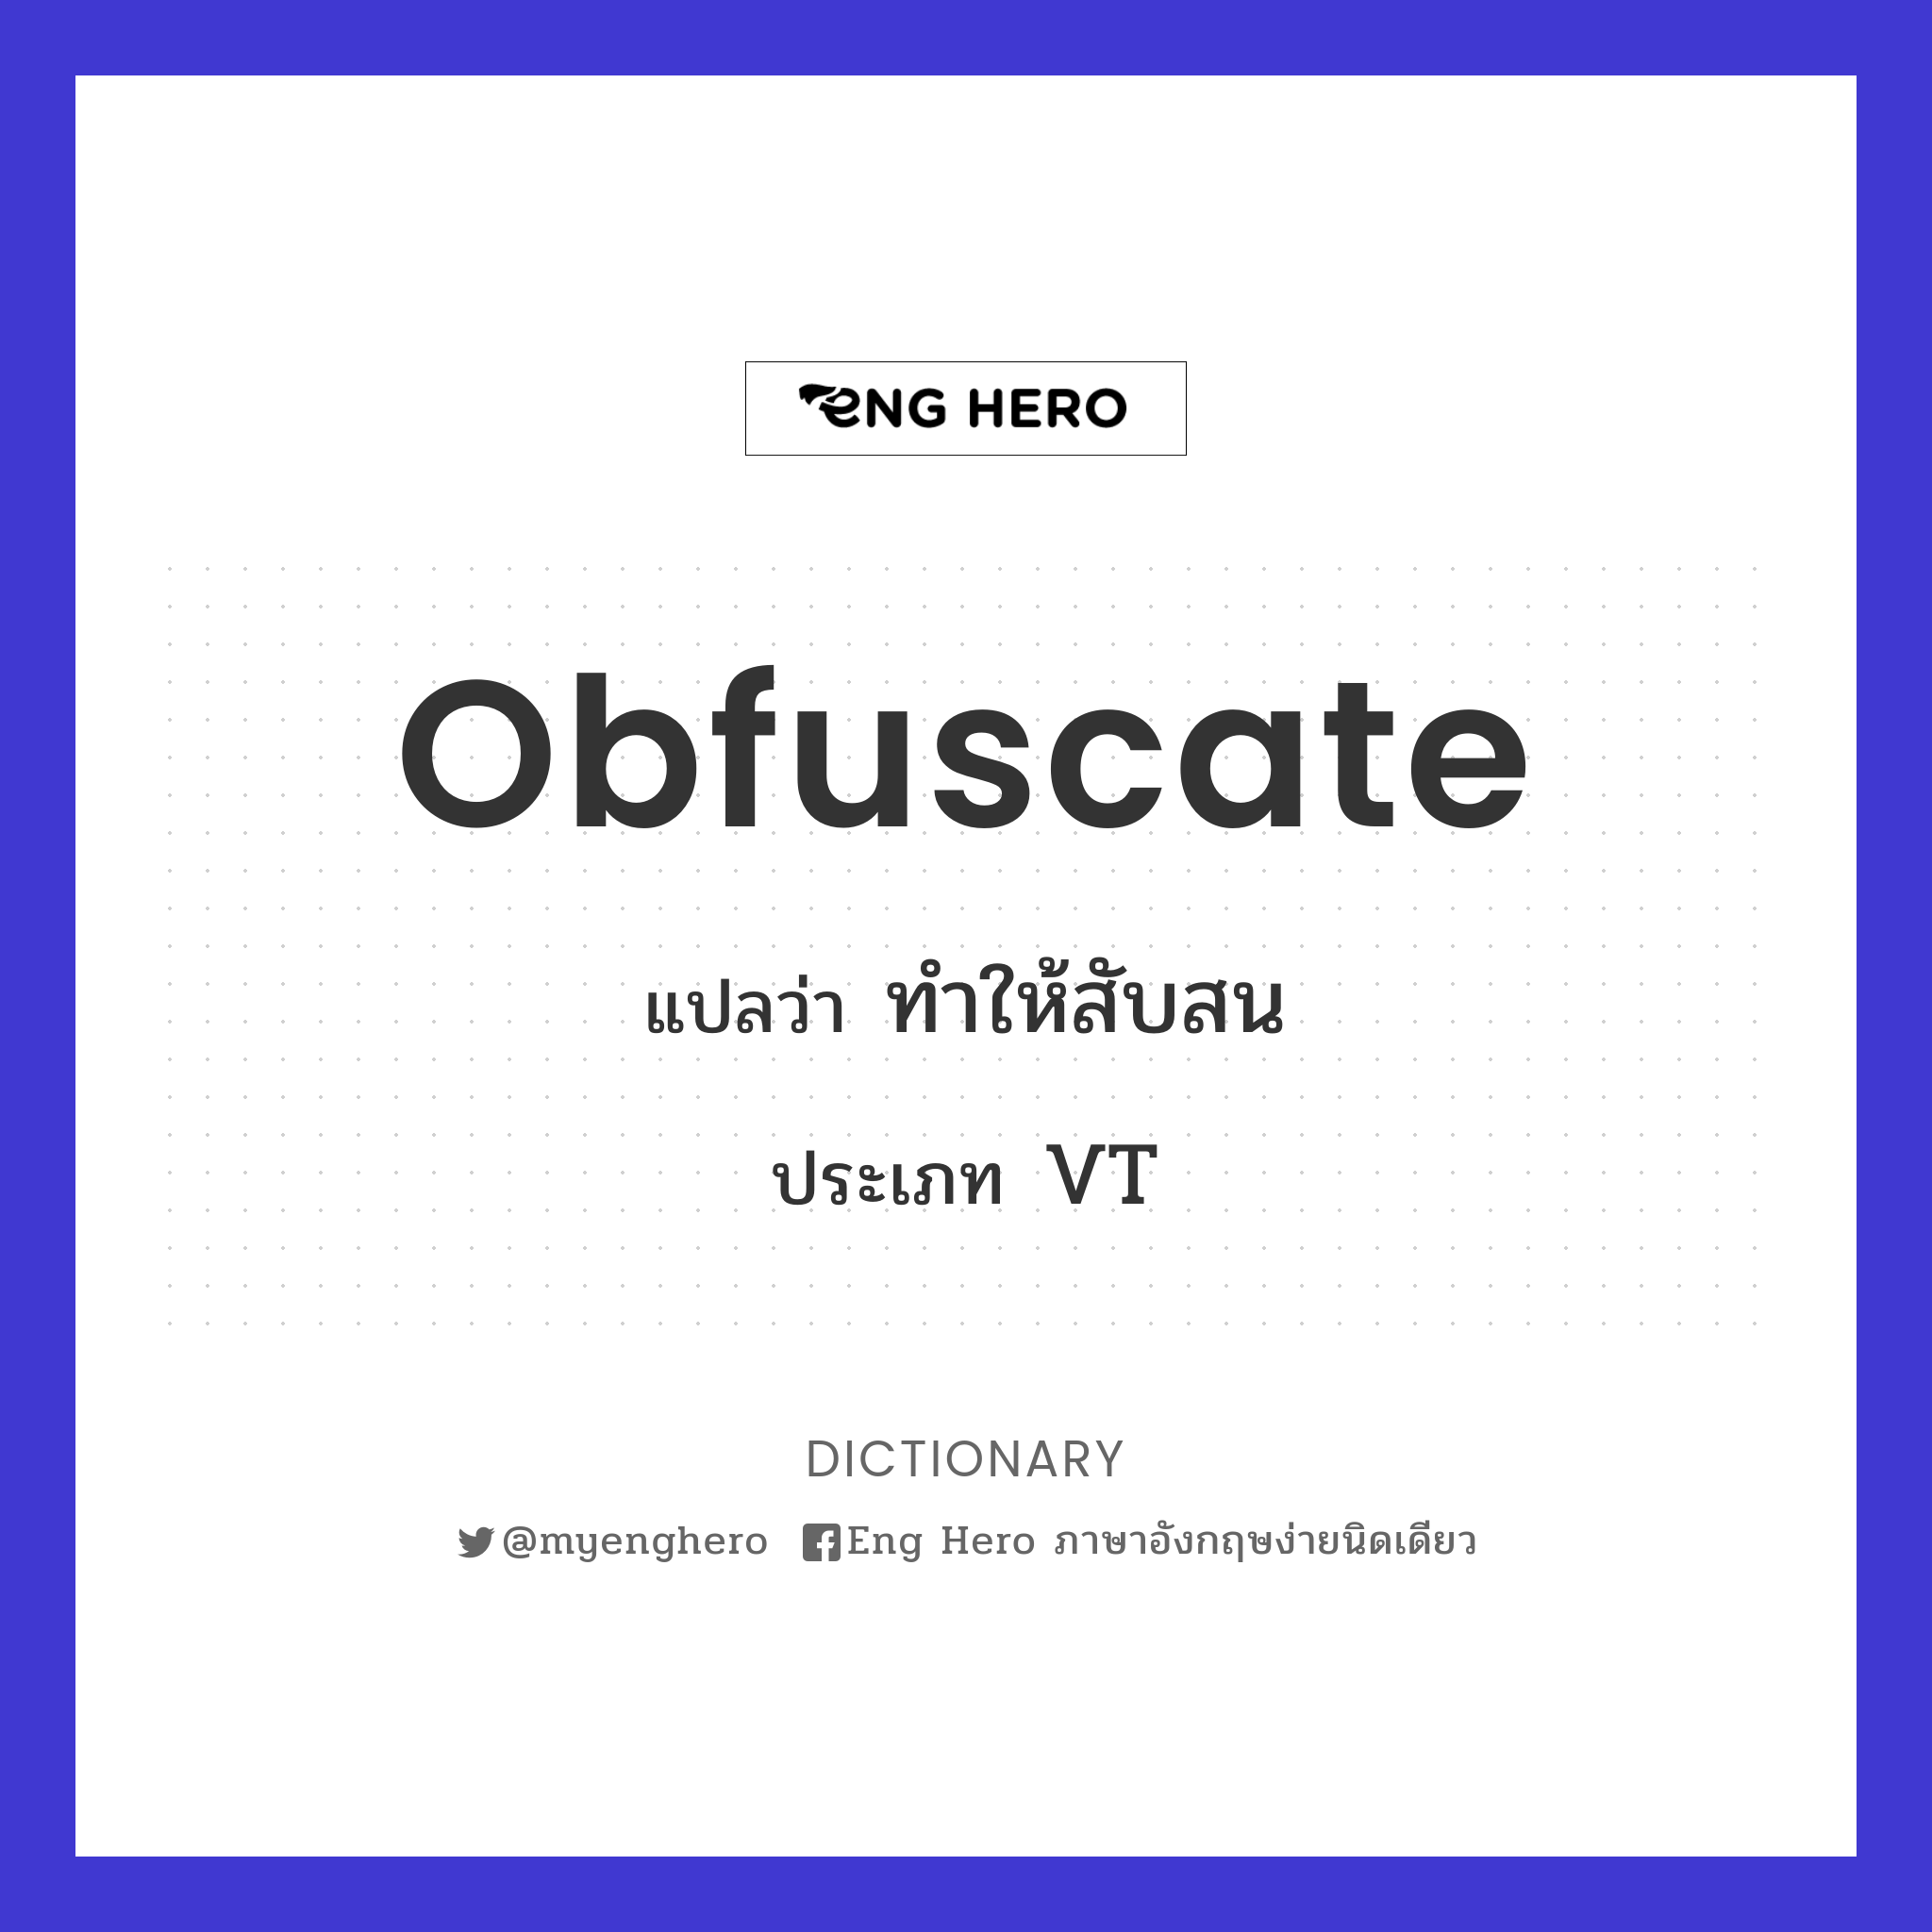 obfuscate